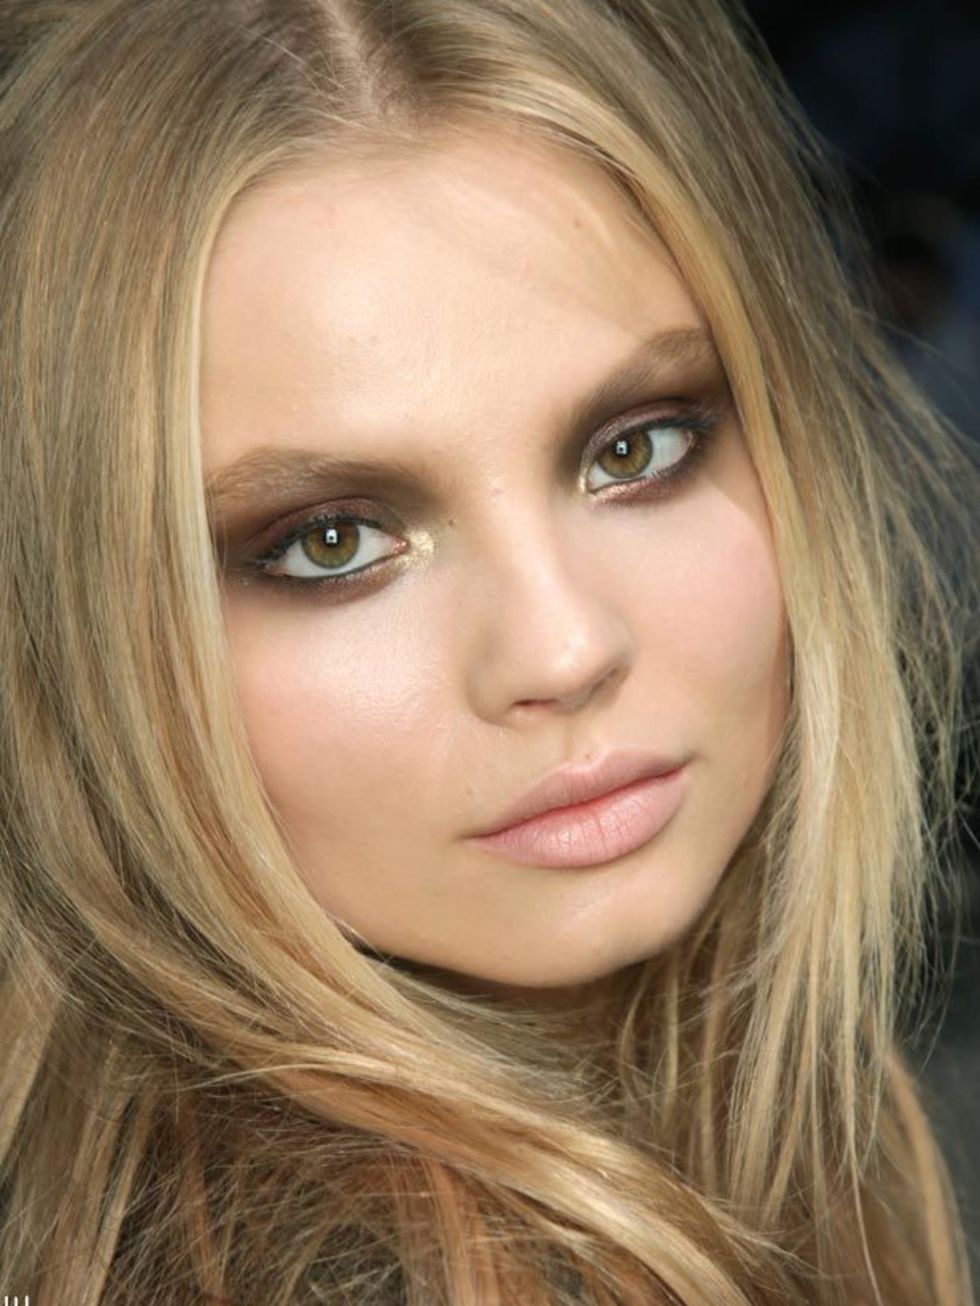 <p><strong>The look: </strong>Autumnal shades reigned supreme on the catwalks. Coffee, mushroom, taupe and khaki hues were chosen over greys and blacks to create smoky eyes from subtle to sultry.</p><p><strong>Seen at:</strong> Chloe, Anna Sui and Roberto